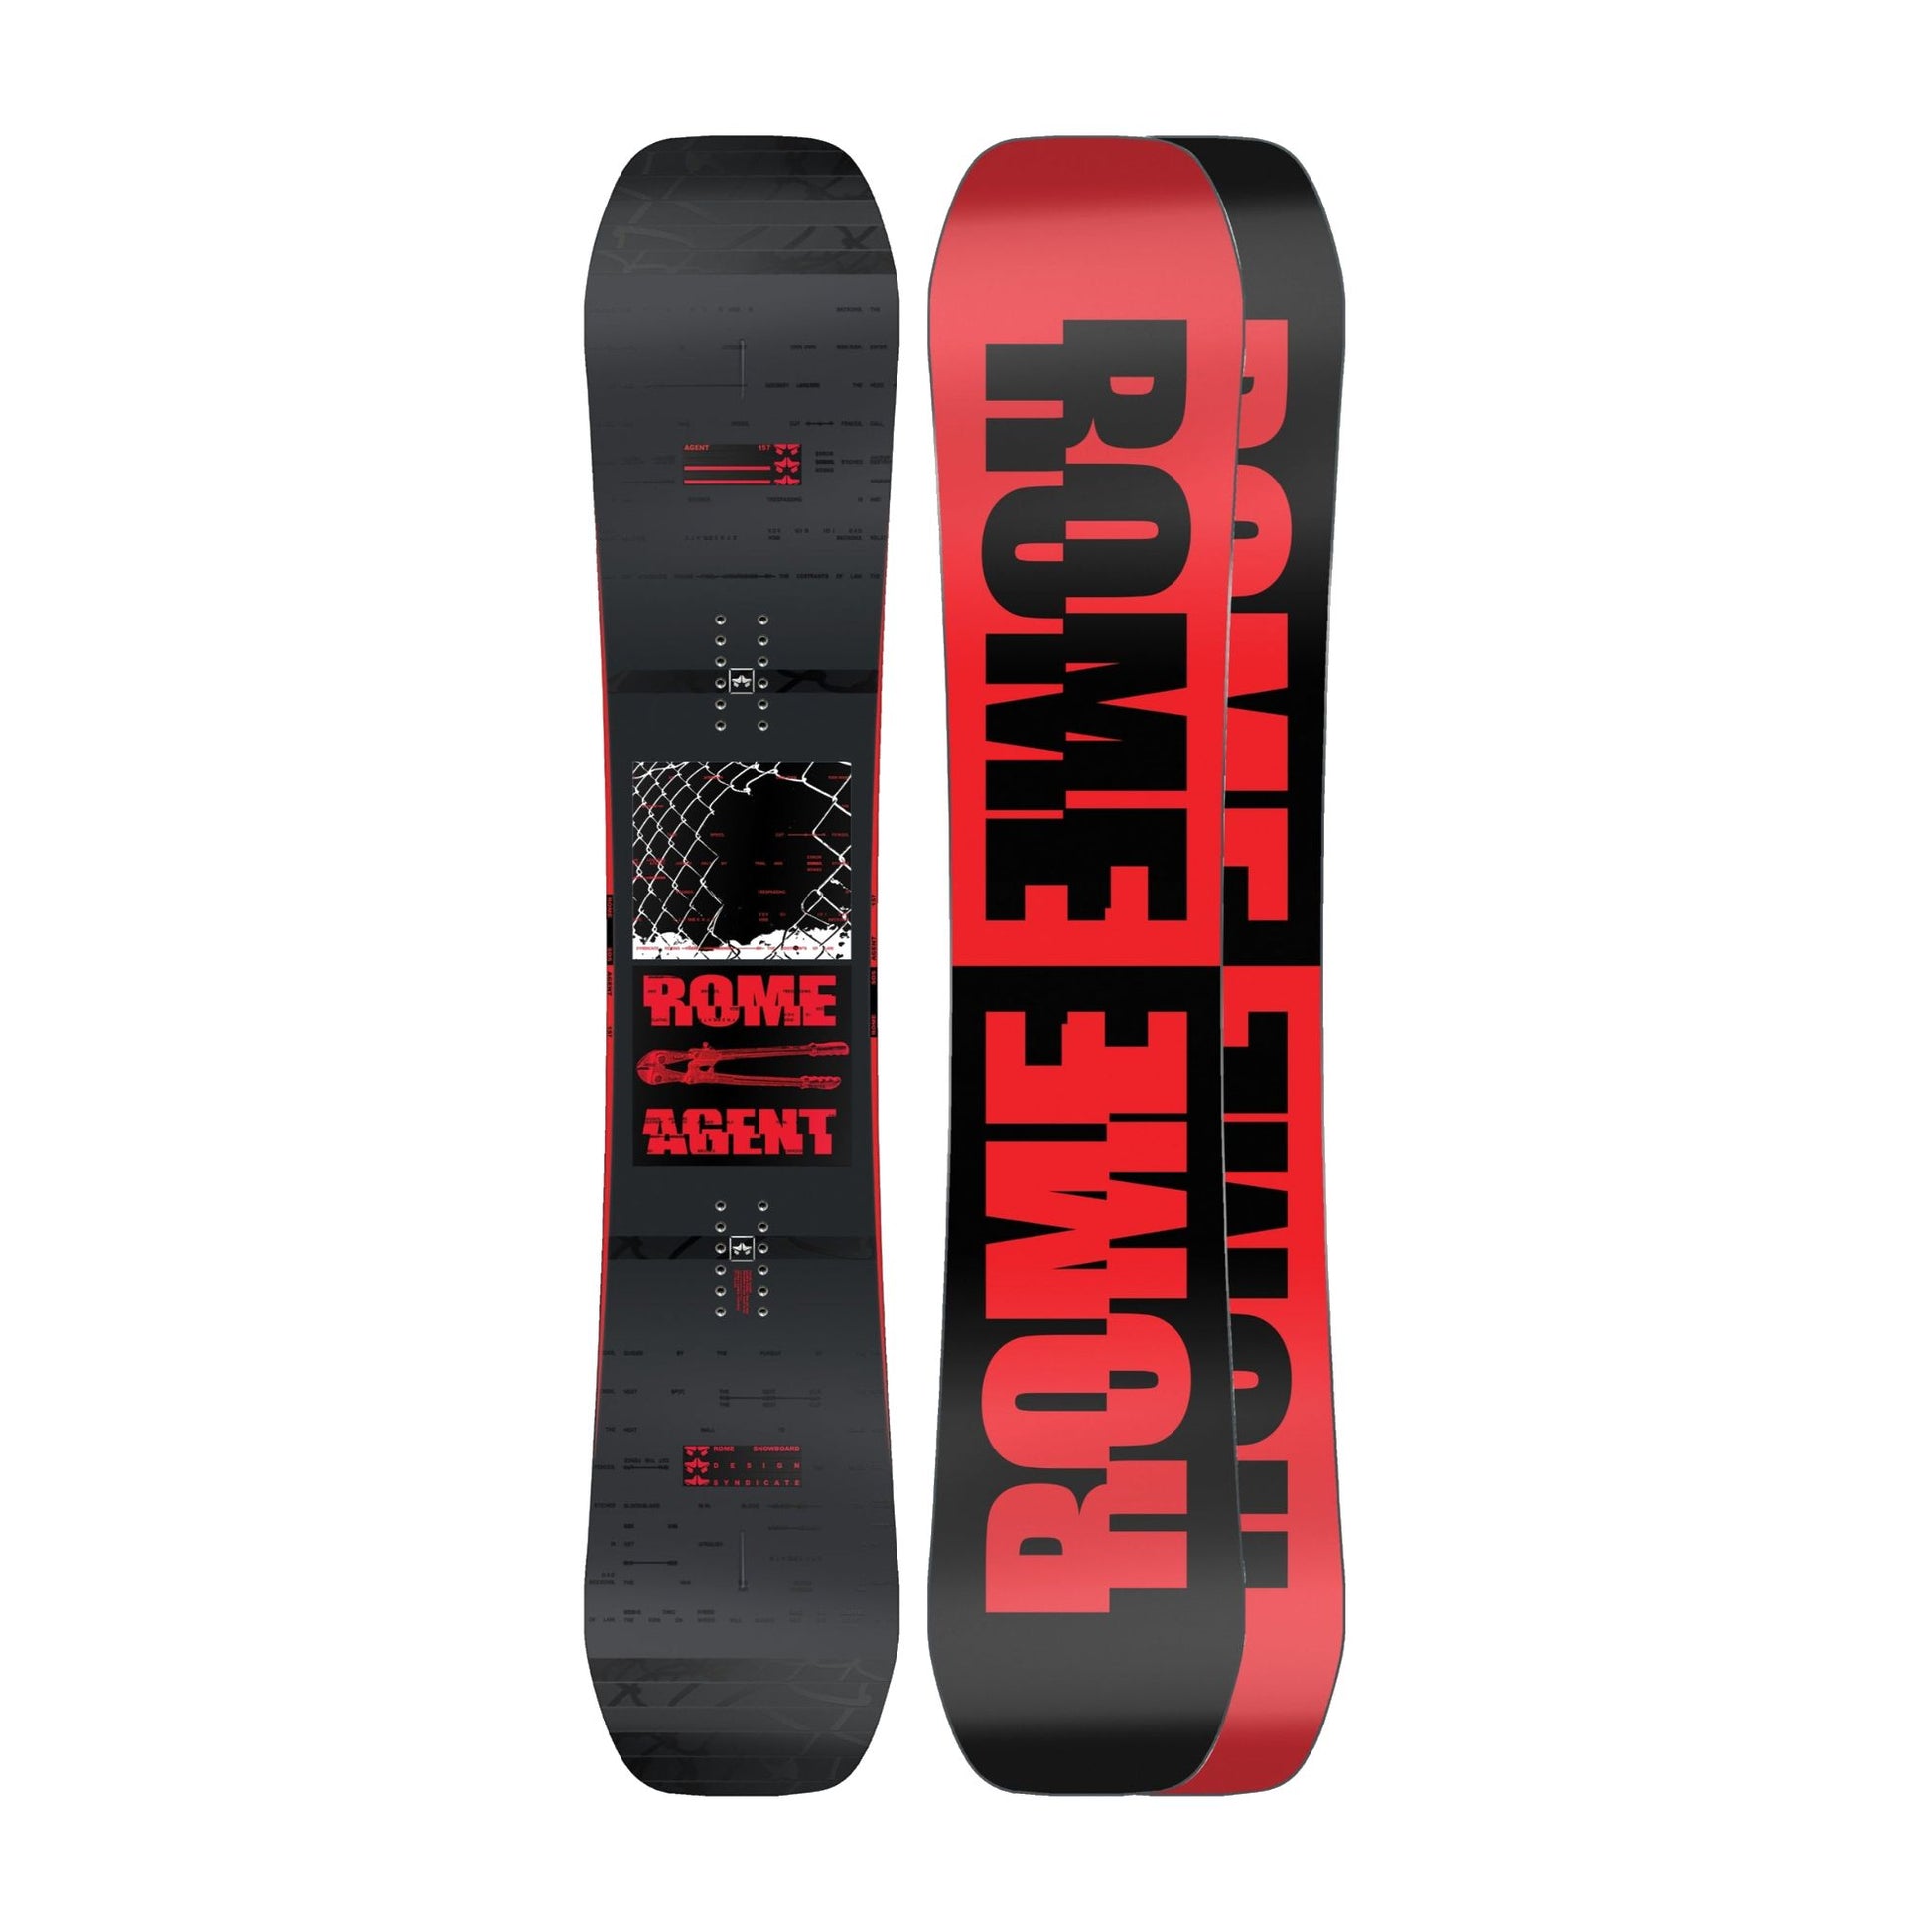 Rome Agent Snowboards 155w Snowboards